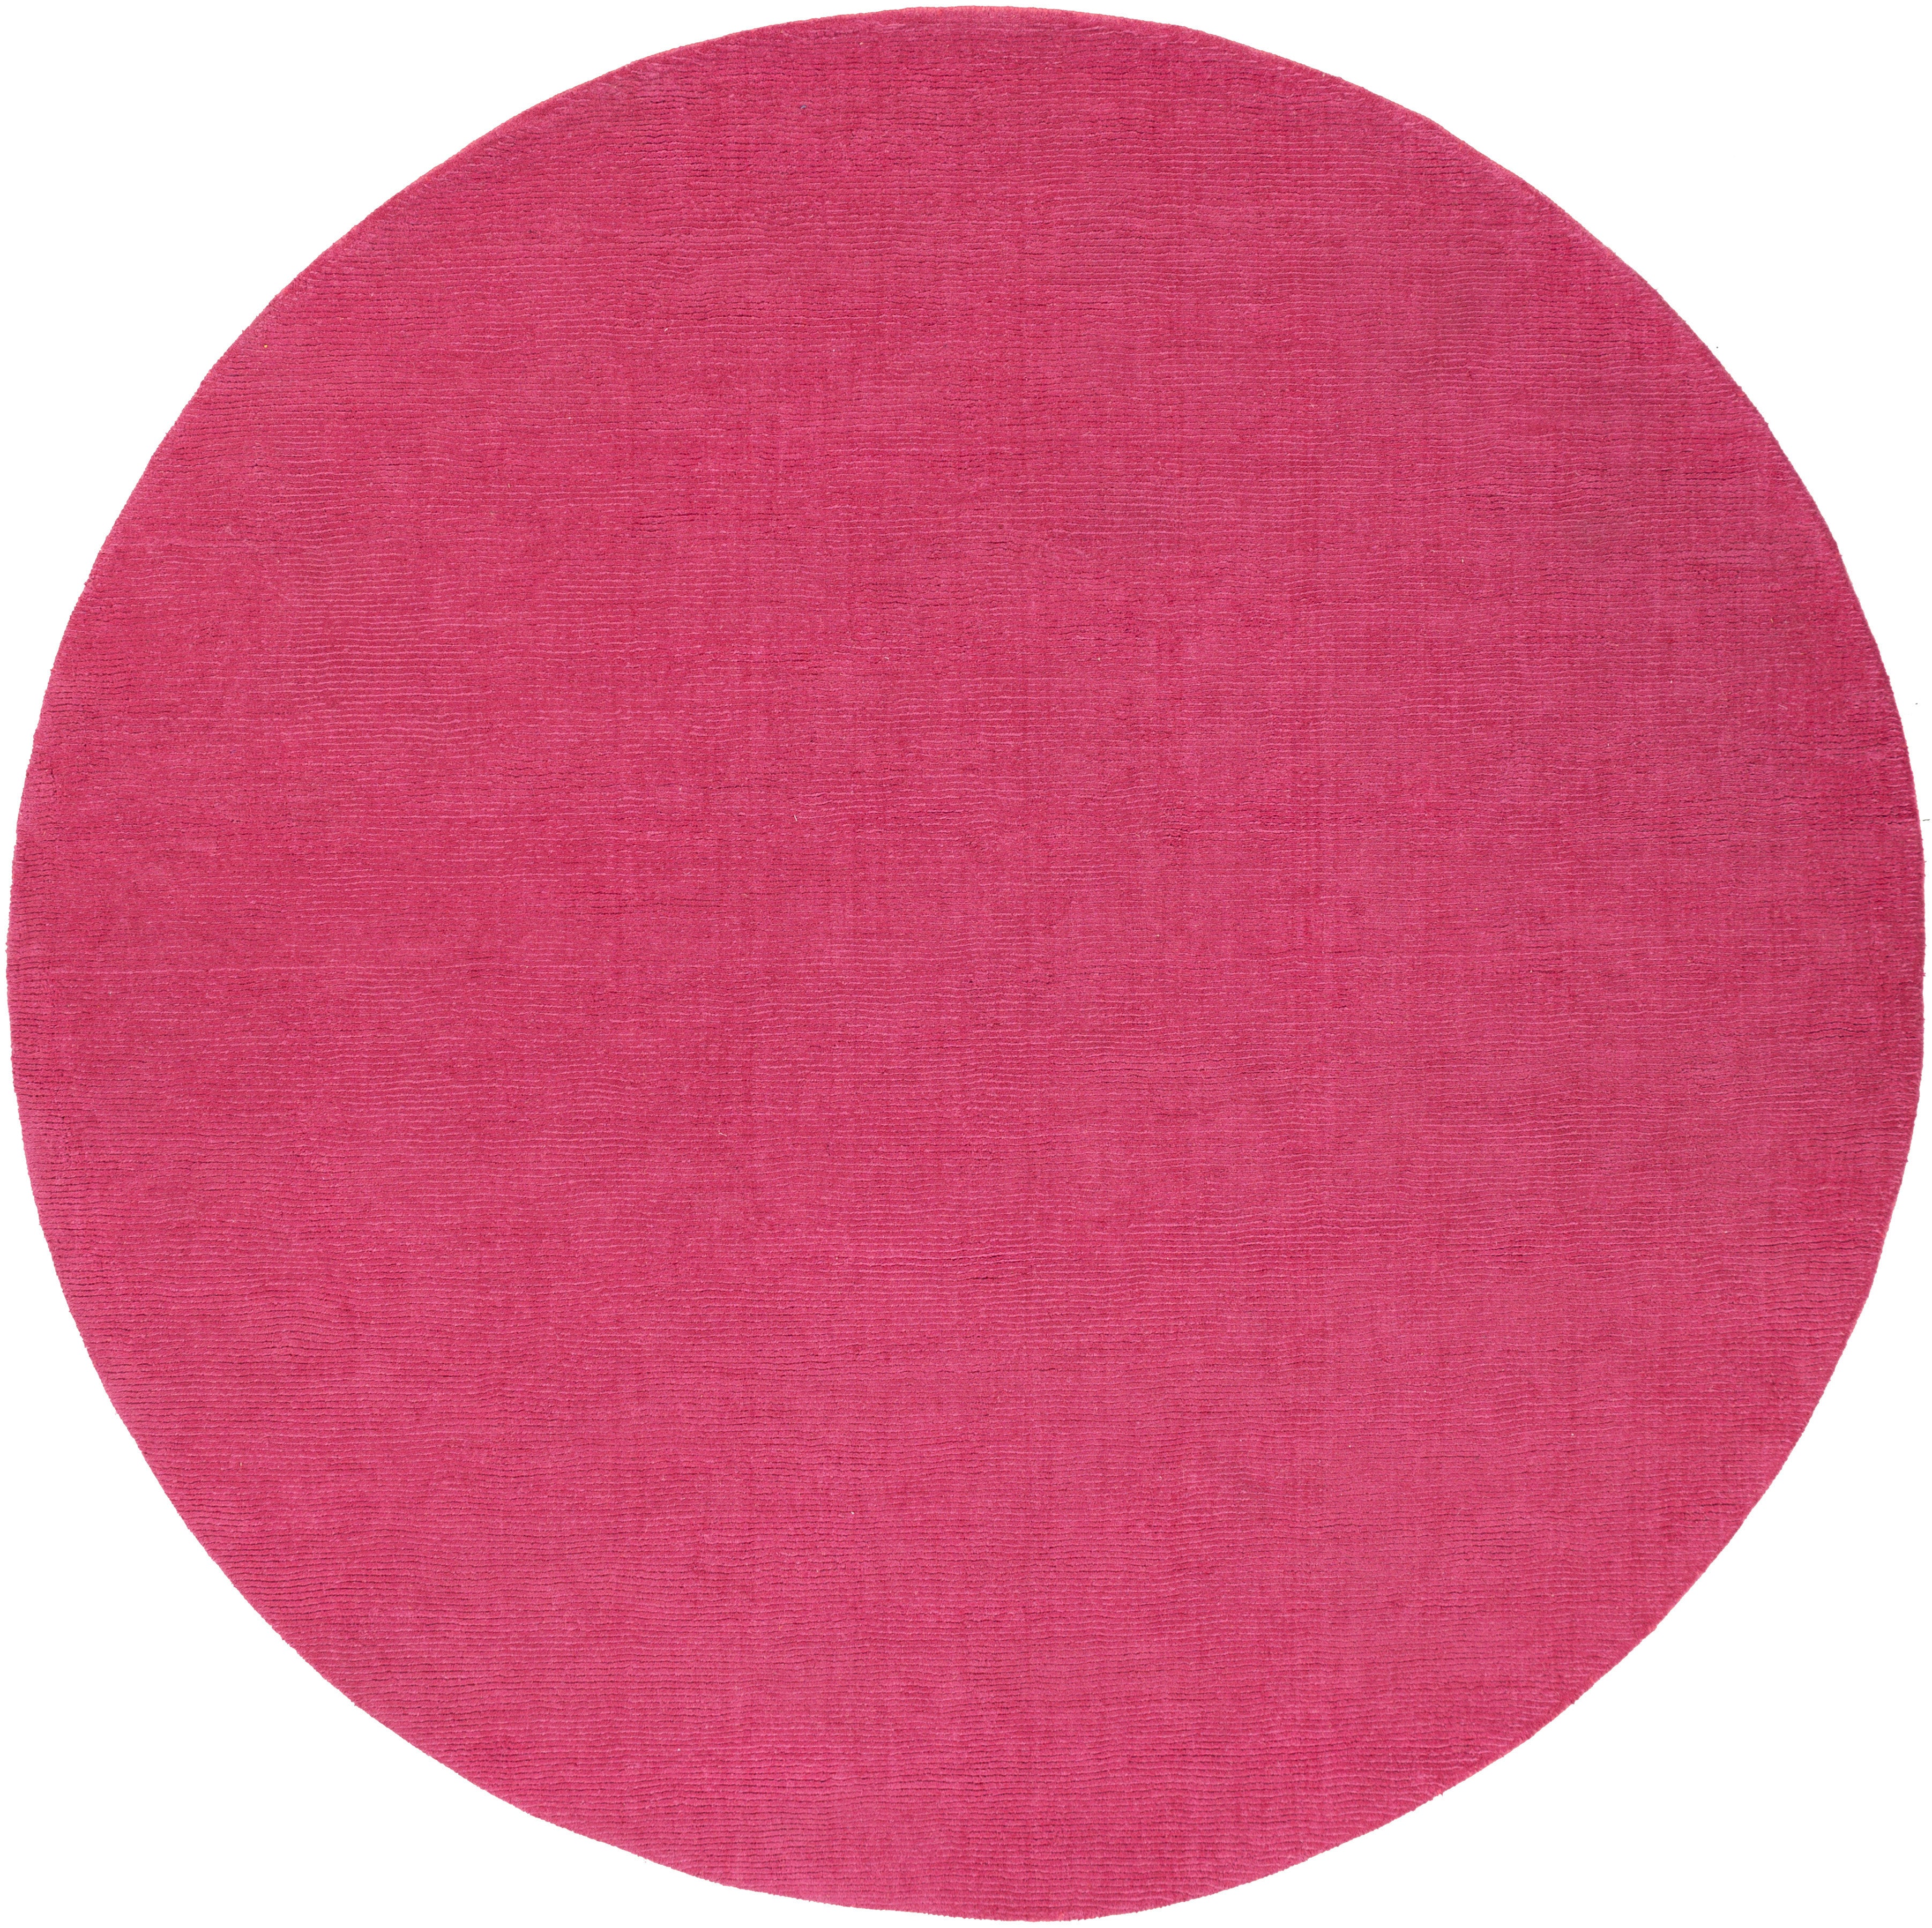 Surya Mystique M5327 Pink Solids and Borders Area Rug